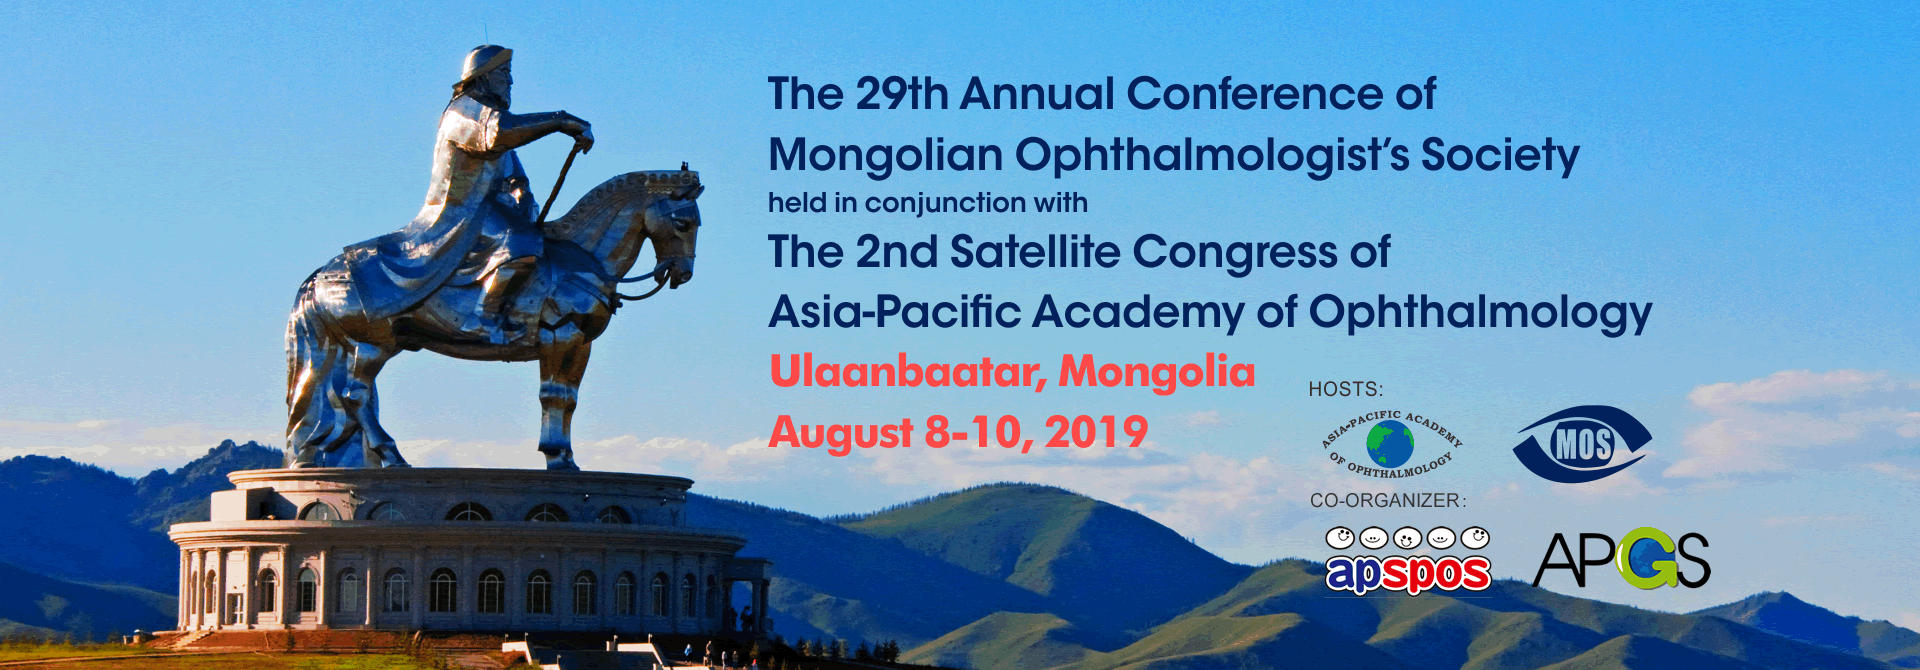 2019 The 2nd Satellite Congress of APAO+++++